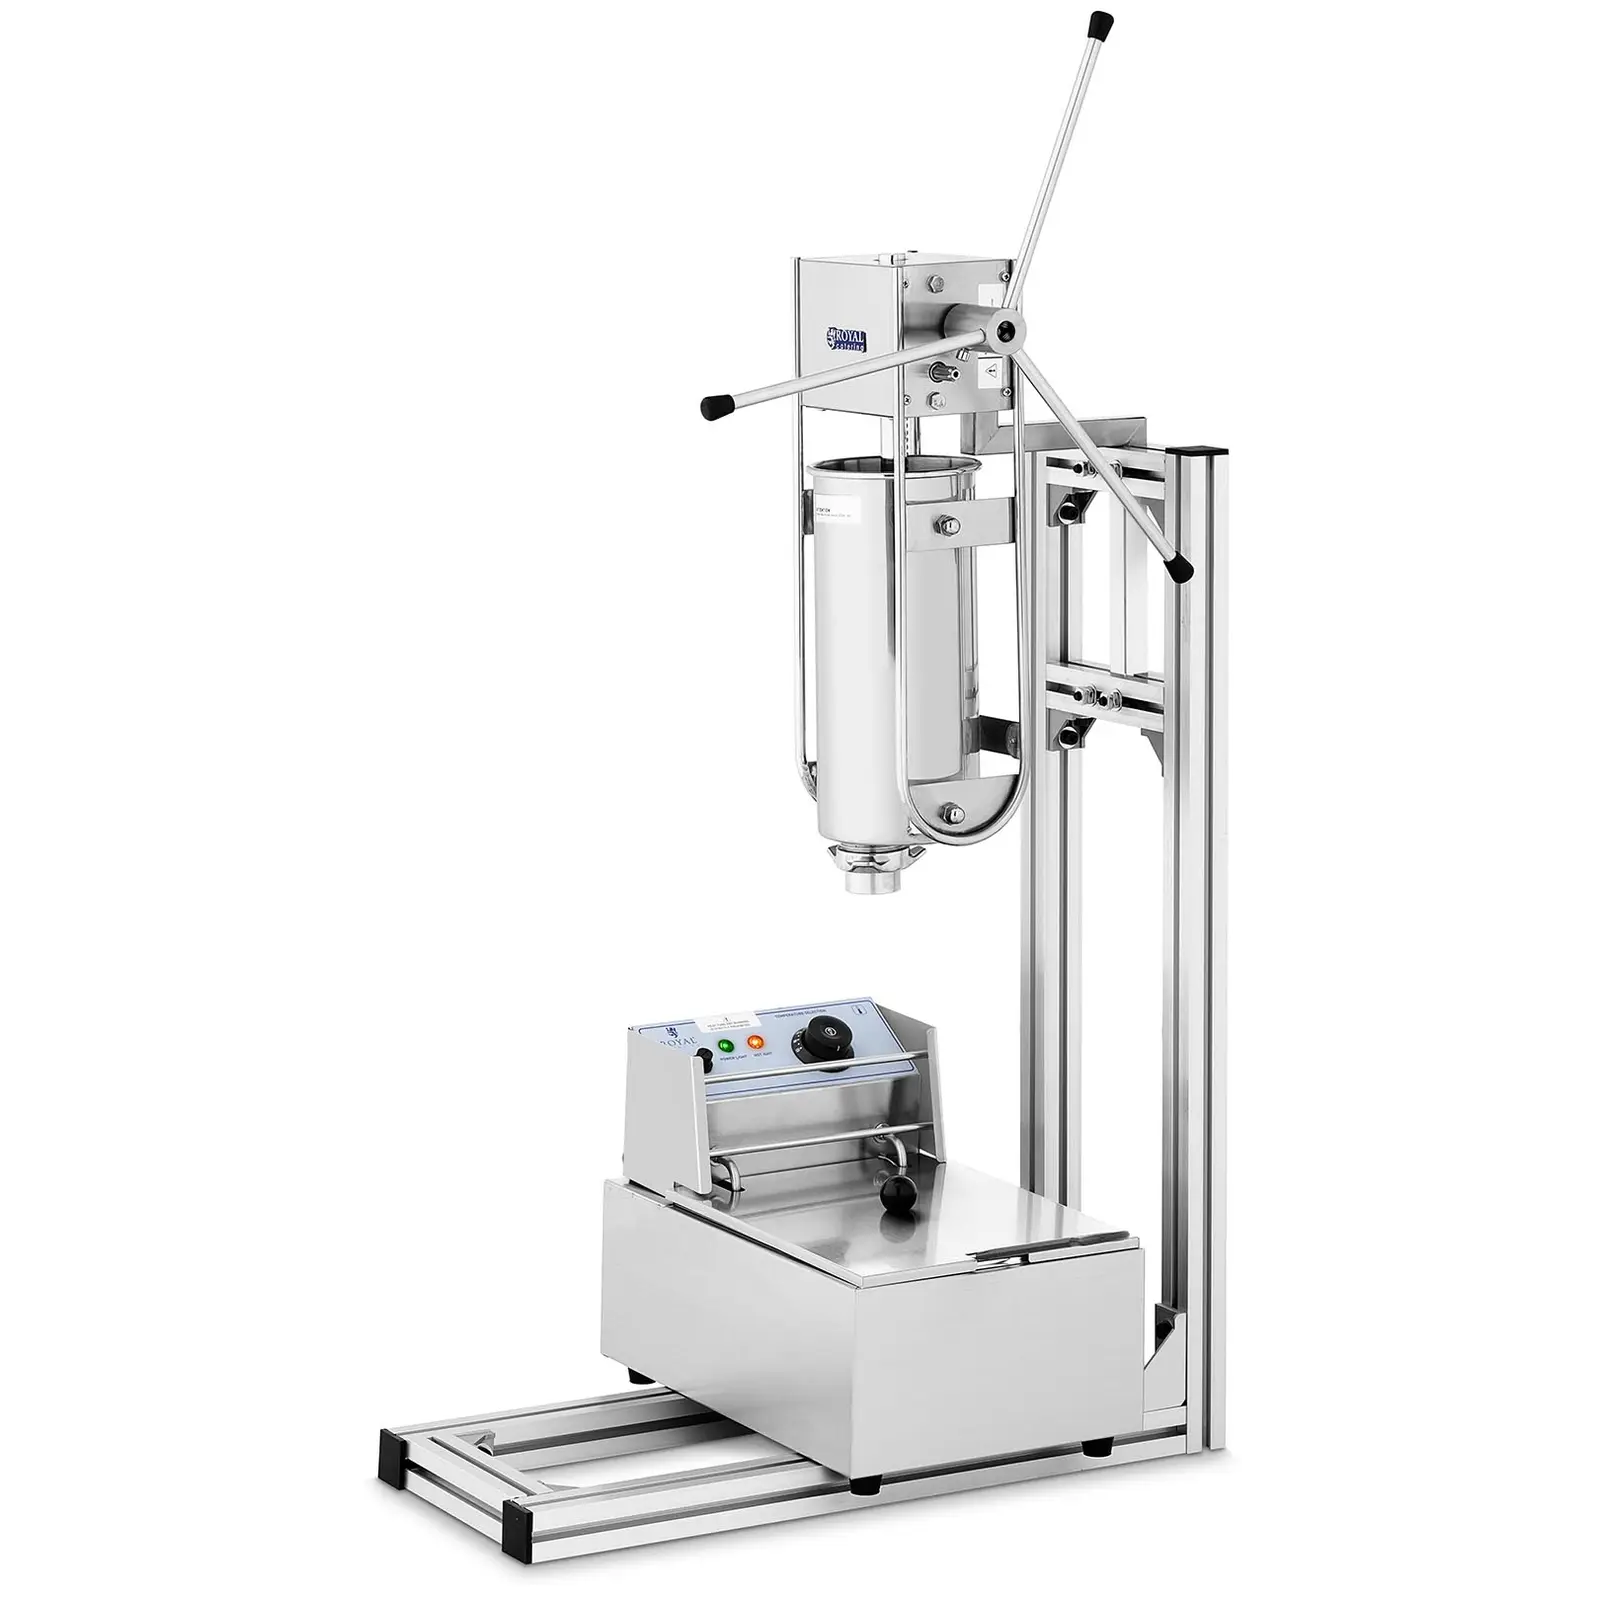 Churros machine - 5 L - Royal Catering - 2500 W